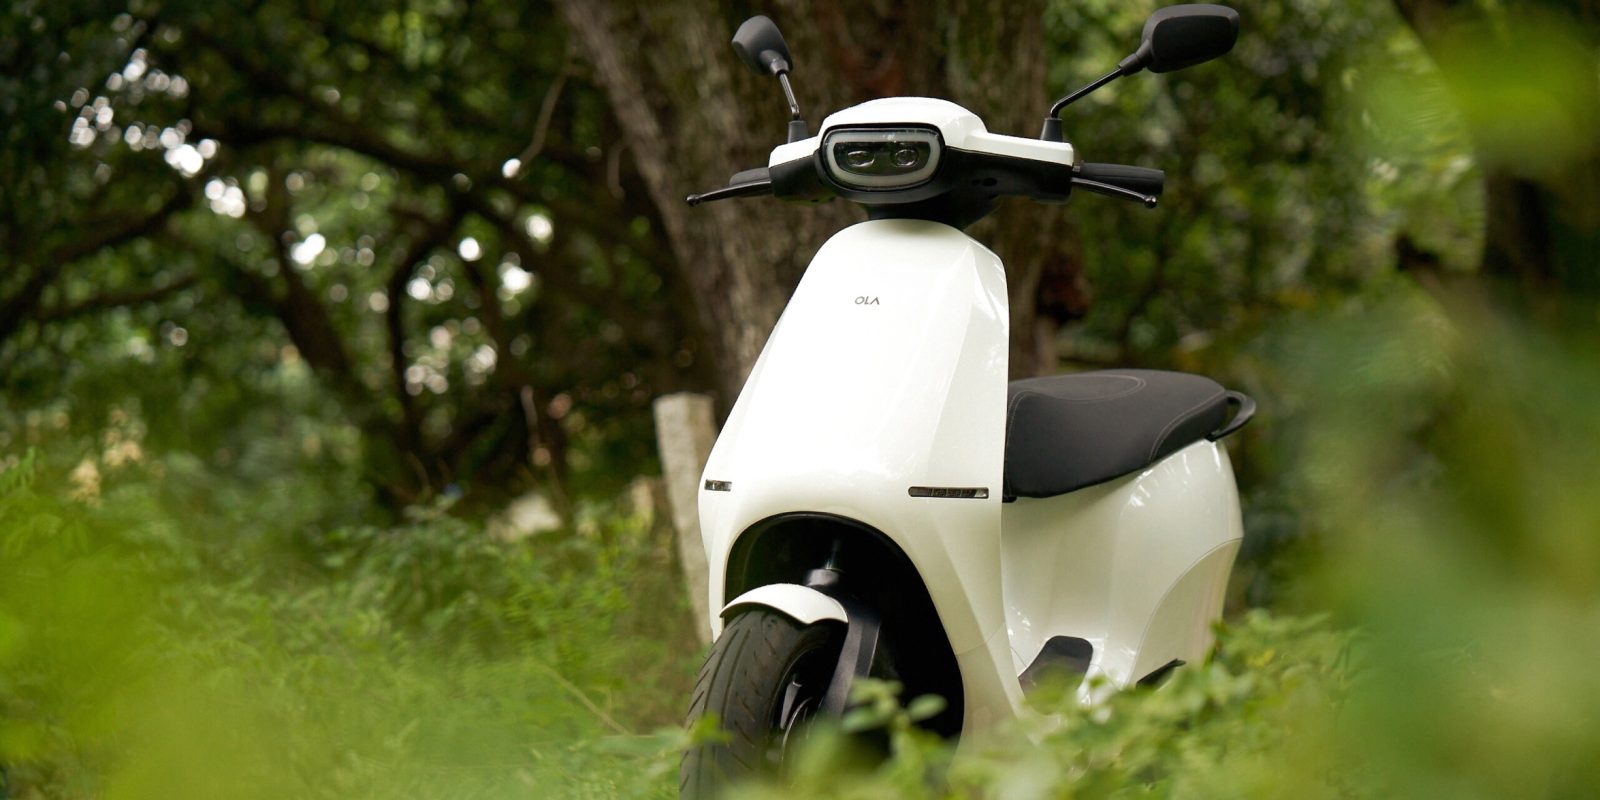 Ola S1 electric scooter premiers with high speed, low price and huge tech